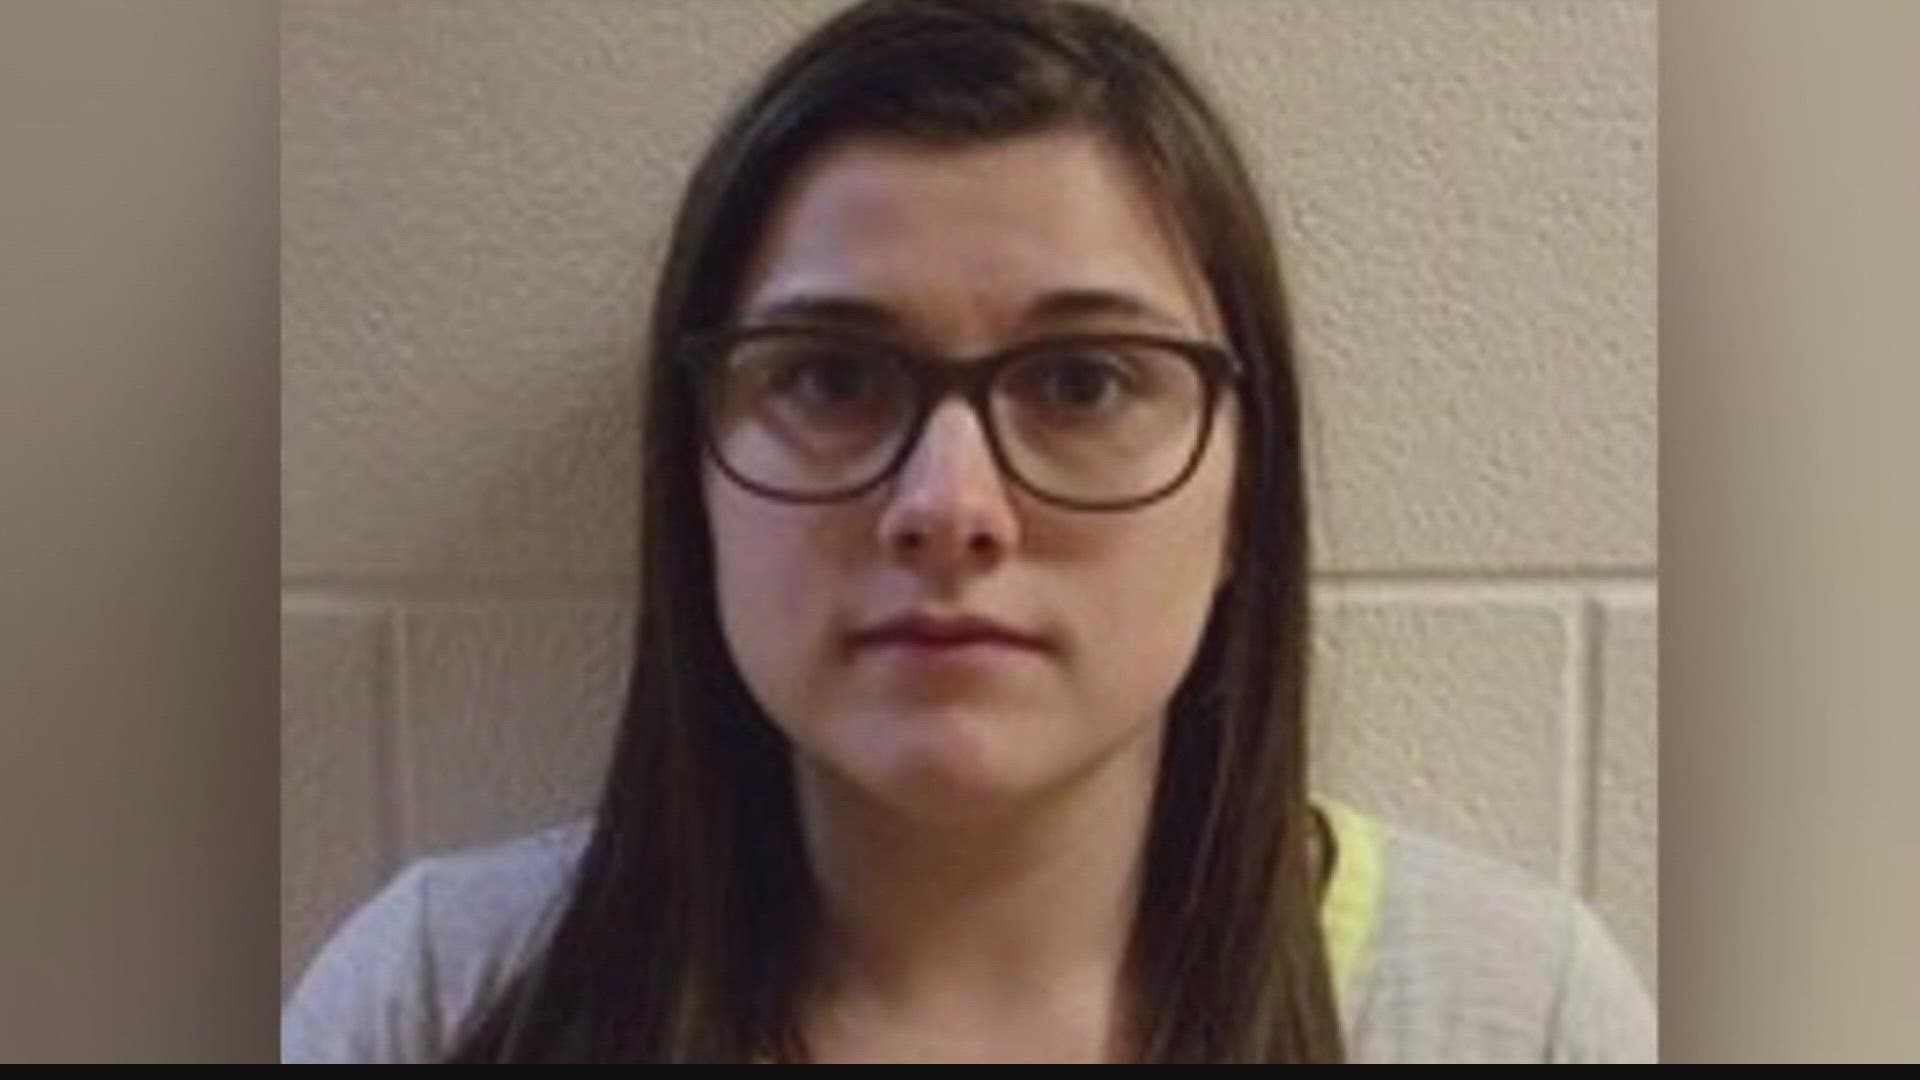 Alyssa Shepherd was sentenced to 10 years in Dec. 2019, but walked out of prison Wednesday a little more than two years later.